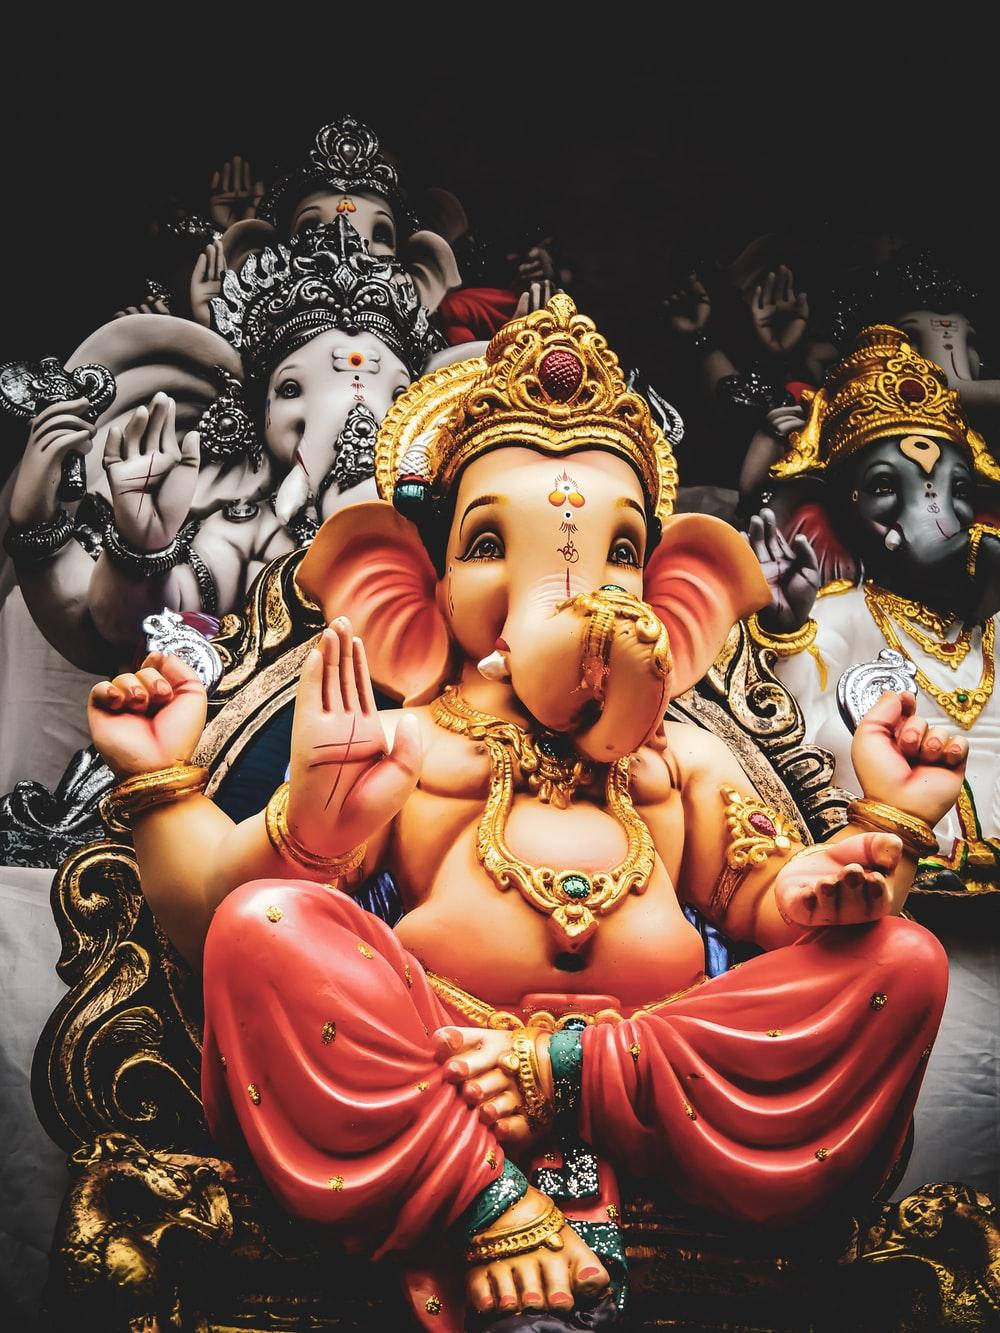 The Lord Ganeshas Angry Look Image With His Weapons